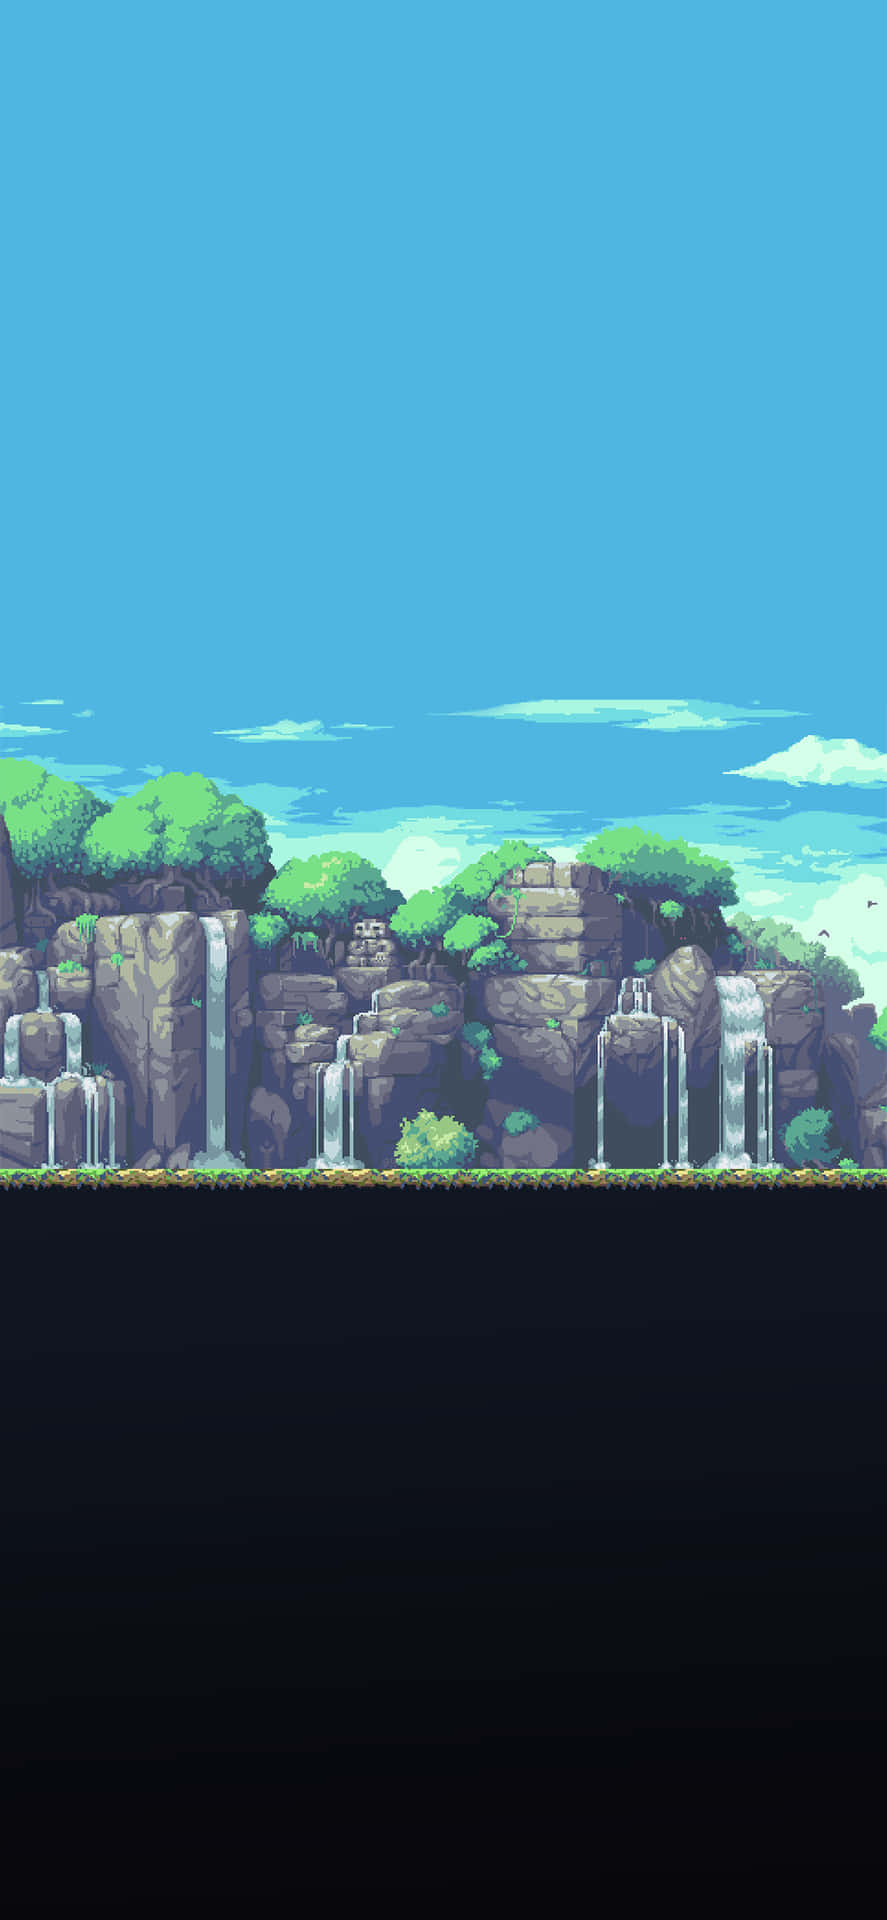 A Pixel Landscape With A Waterfall And Trees Wallpaper